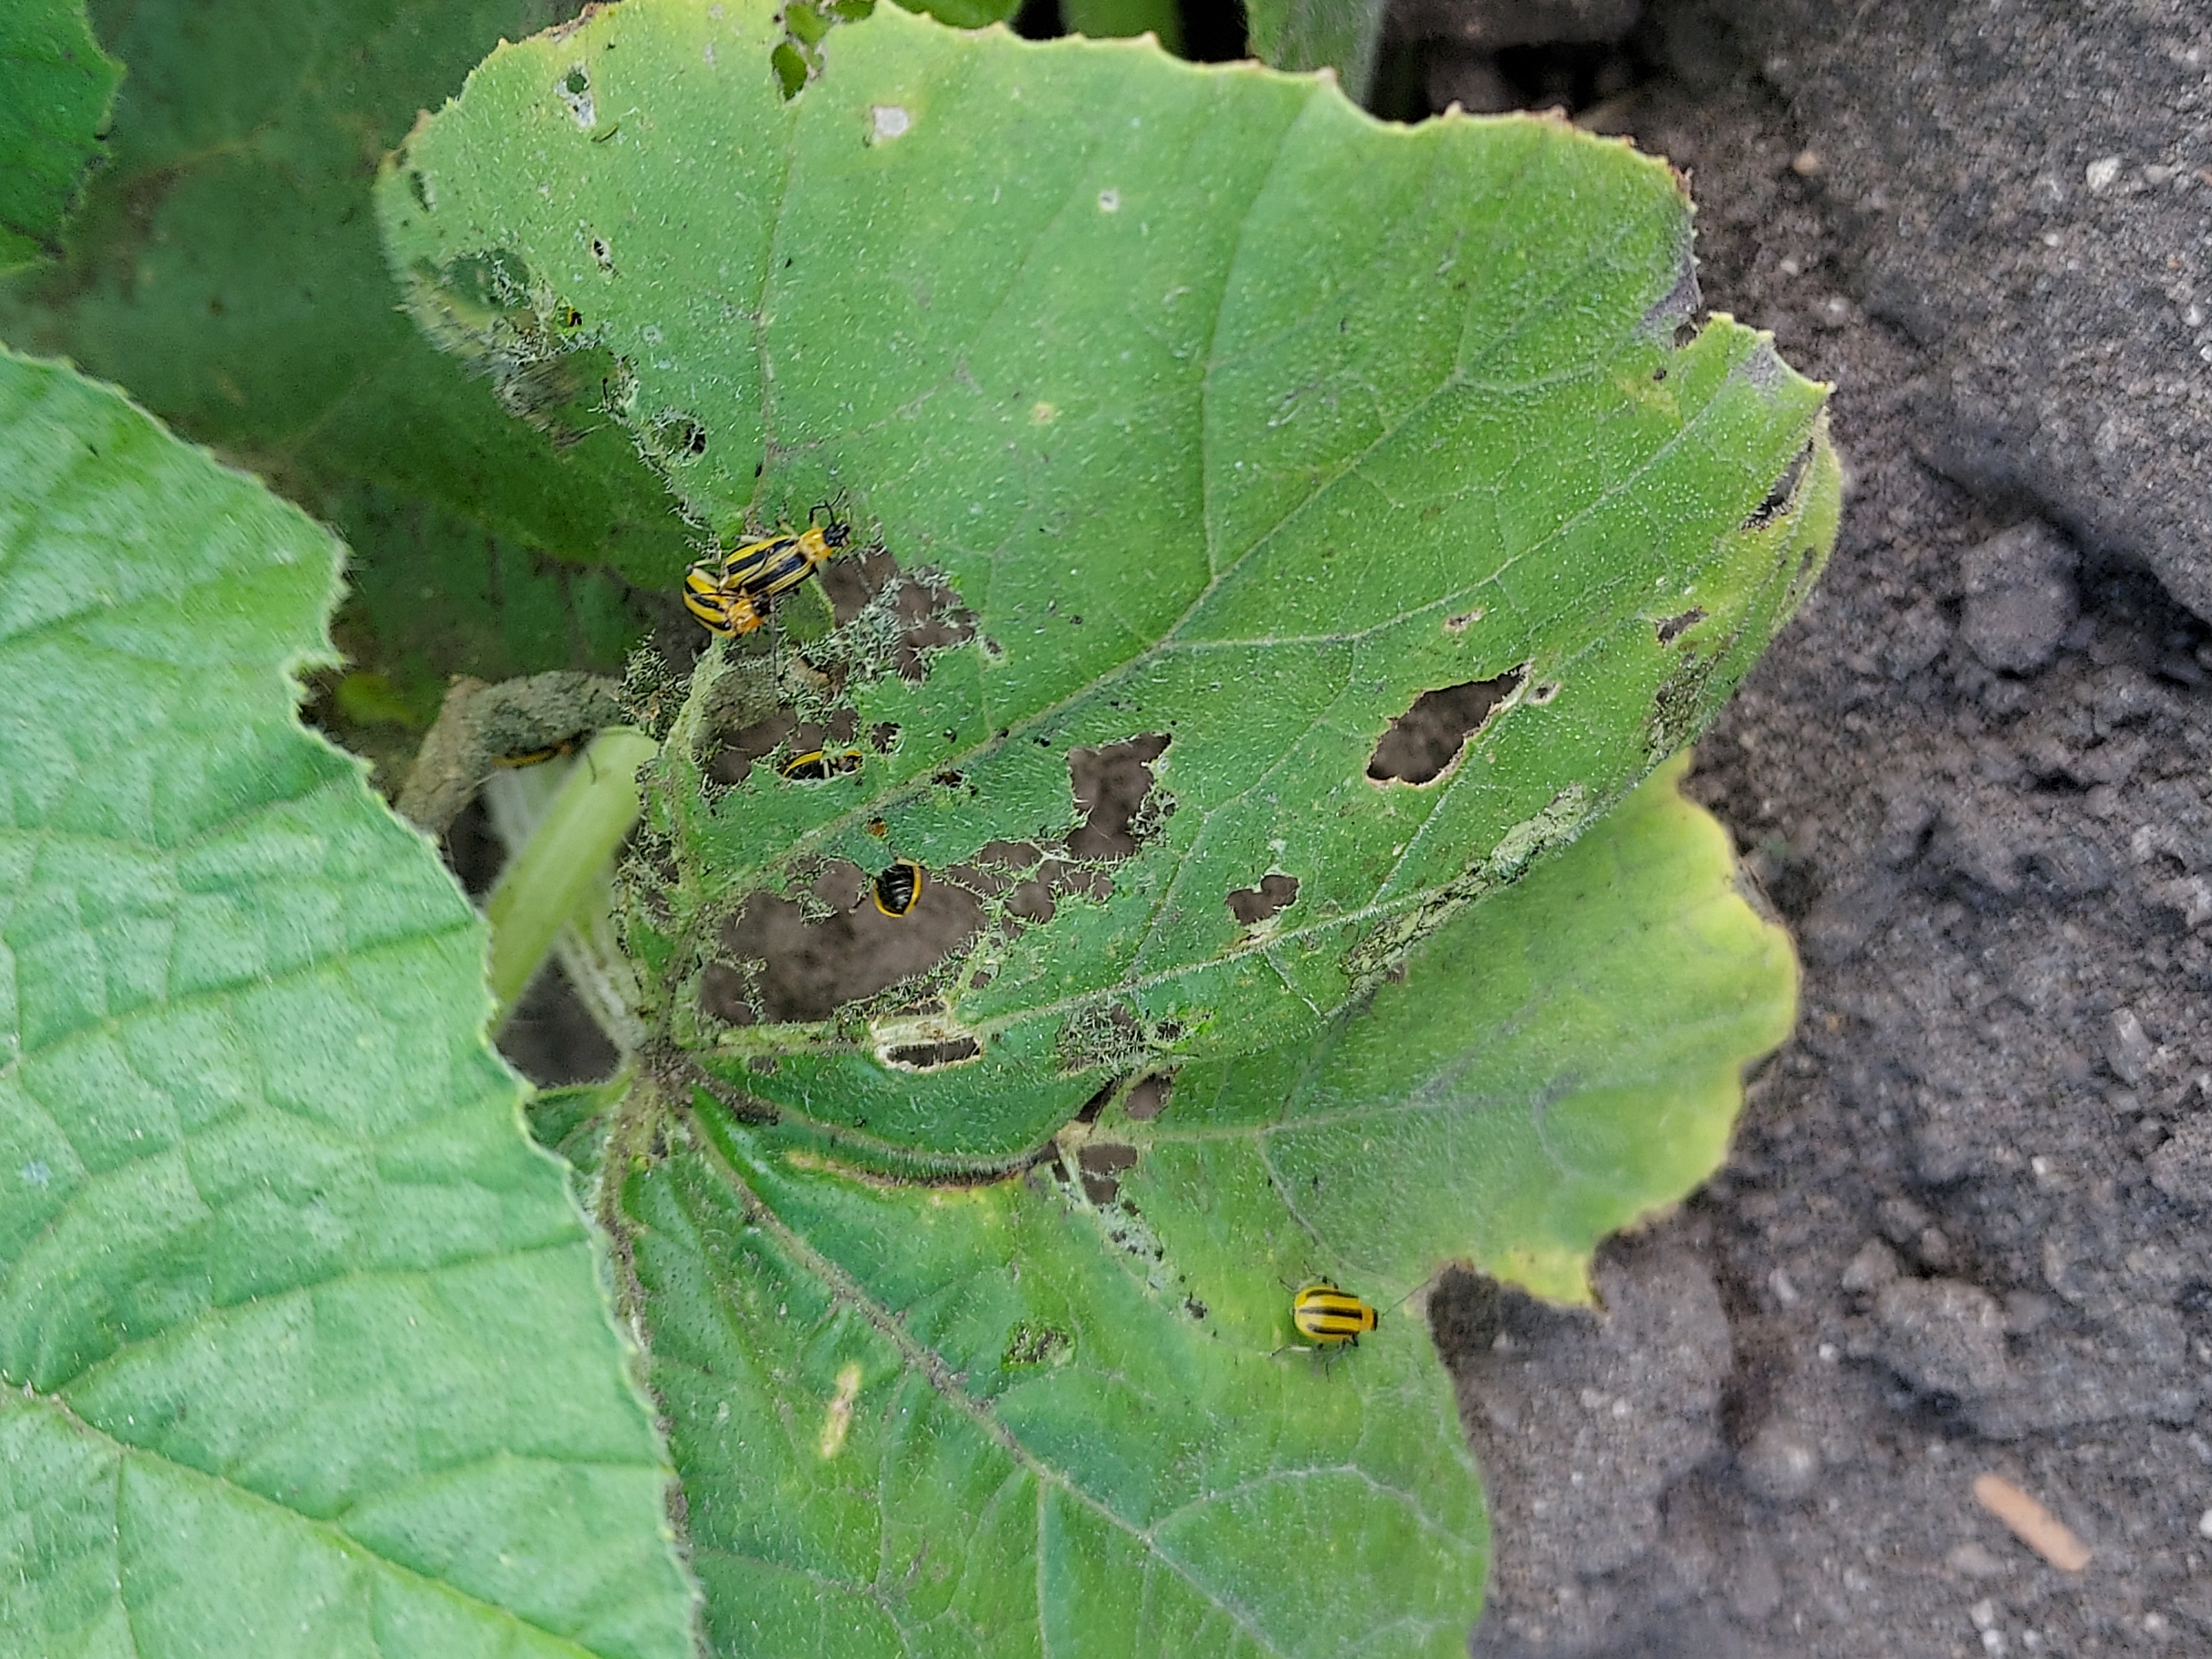 insect damage on cucumber leaf